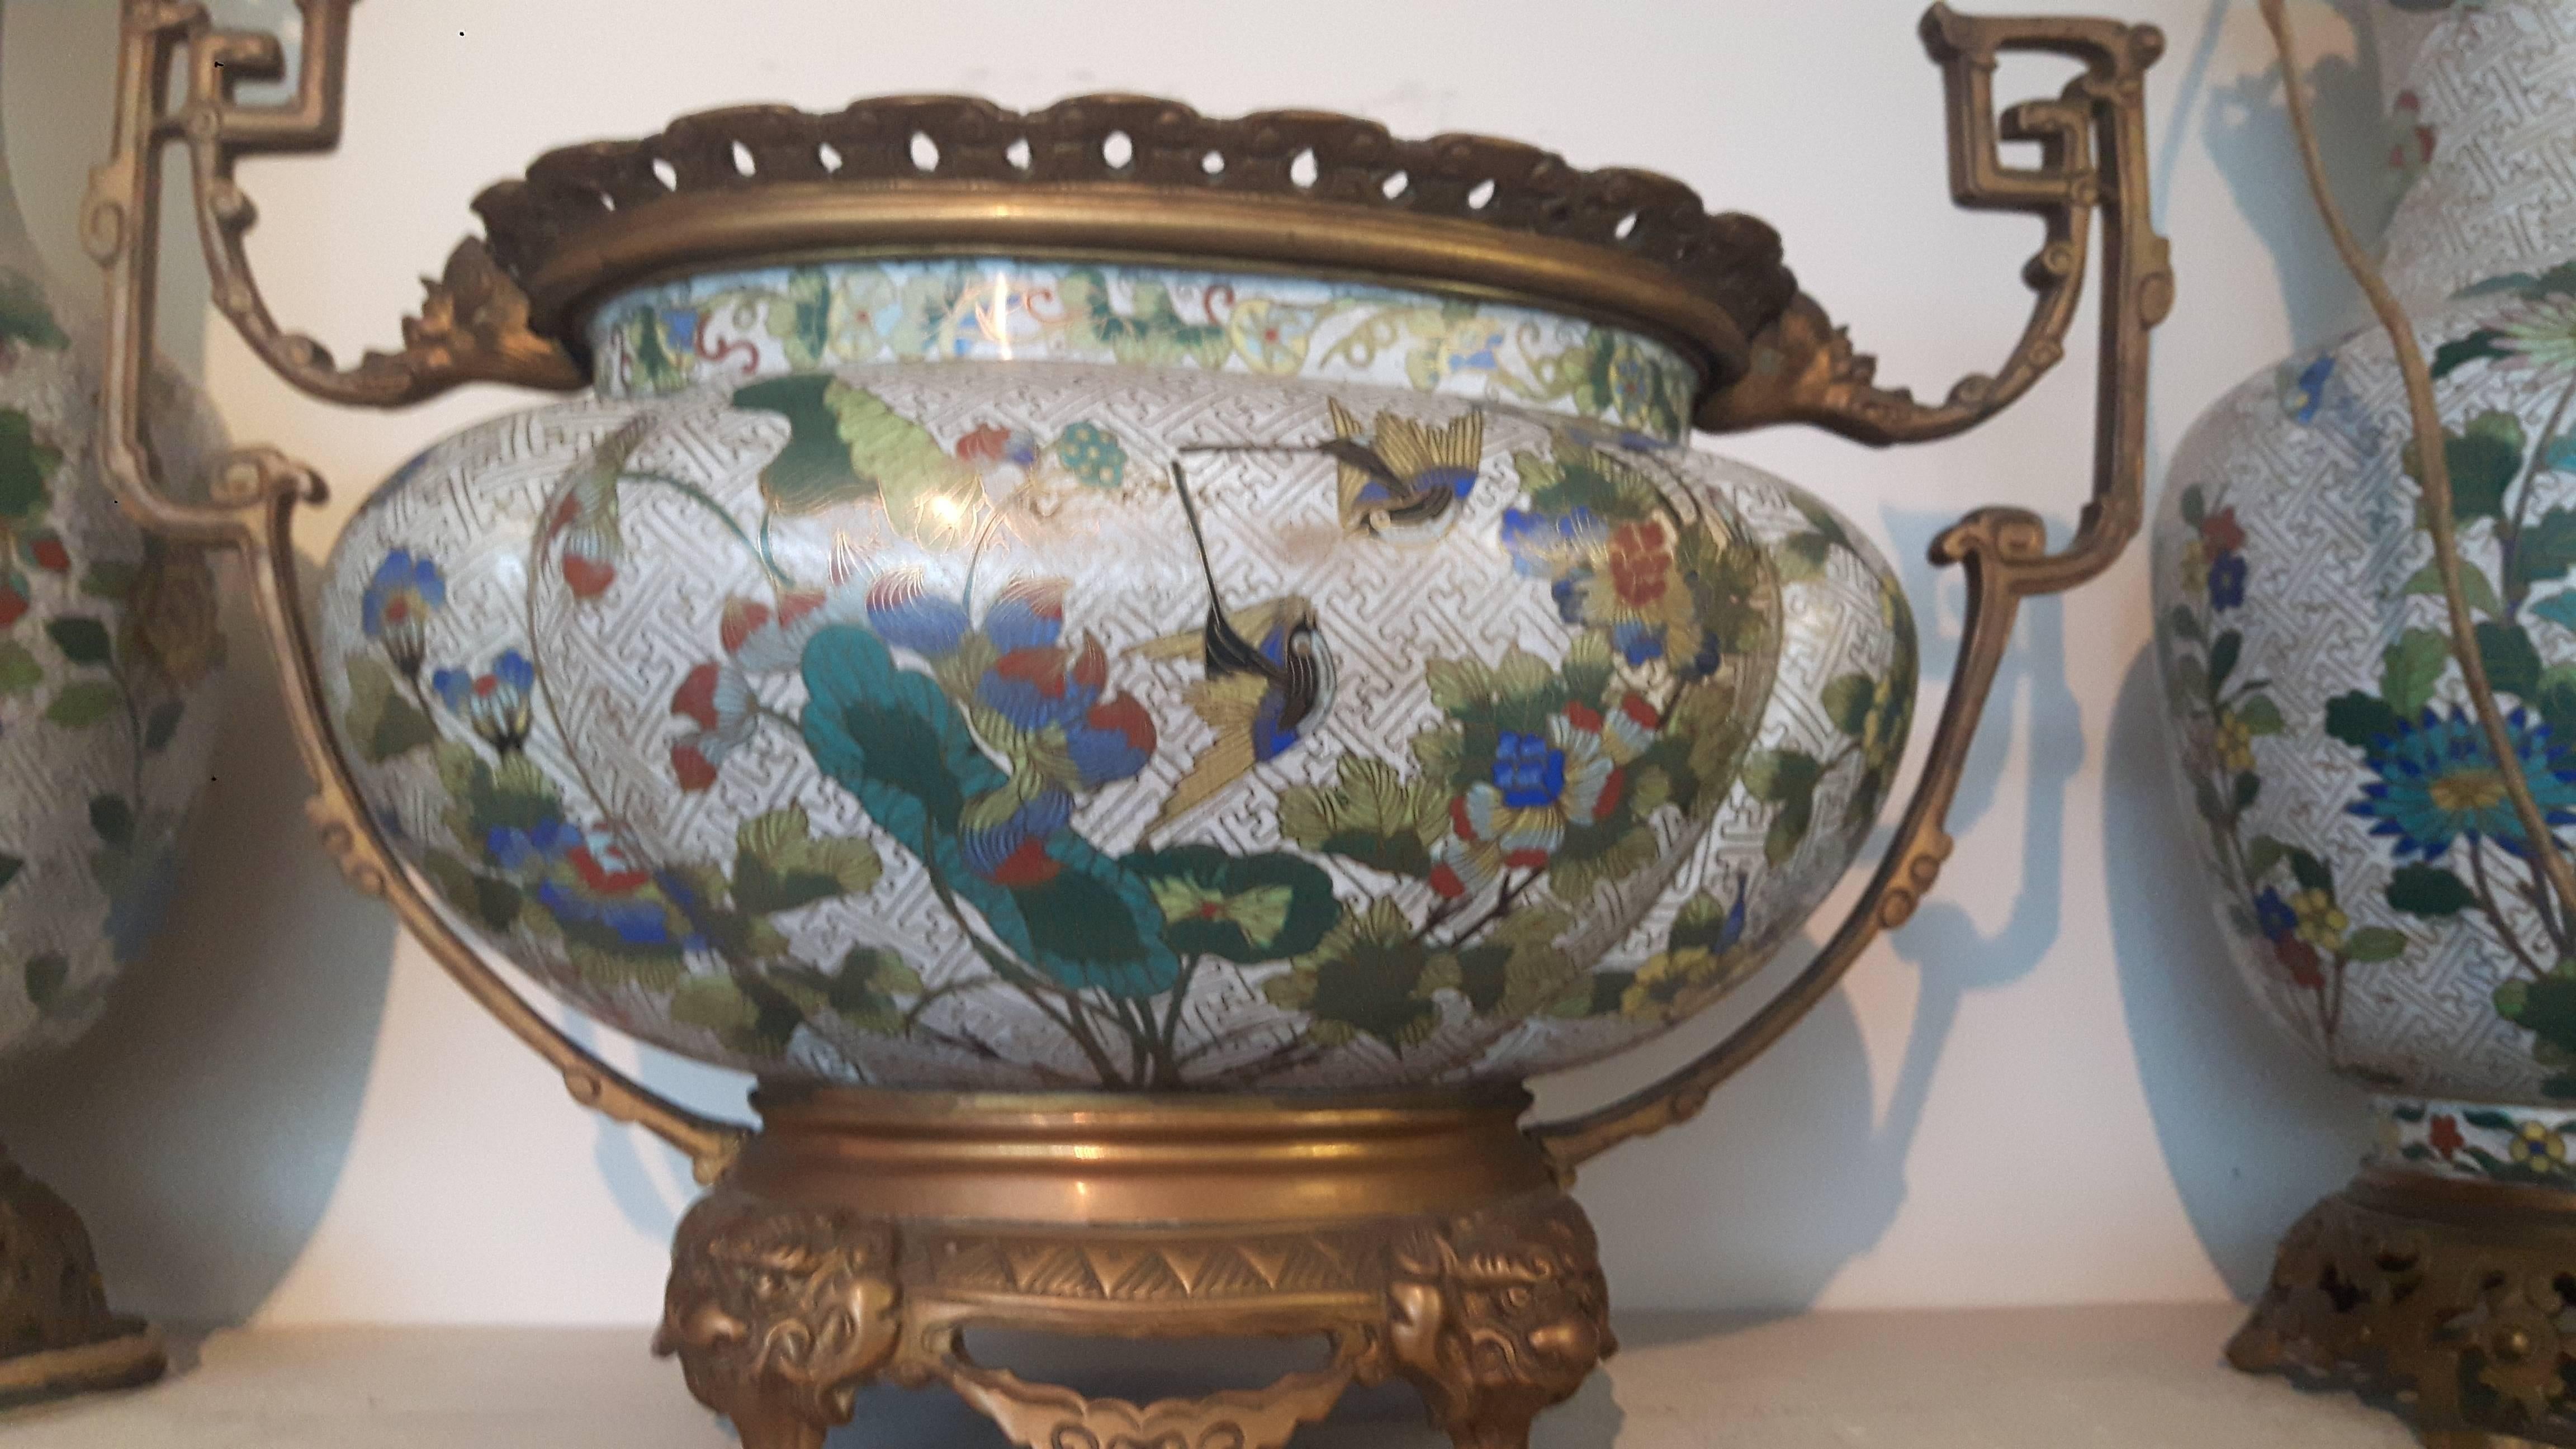 A fine French ormolu-mounted cloisonne enamel three-piece garniture with applied decoration of butterflies flowers and branches. The vases are converted as lamps.